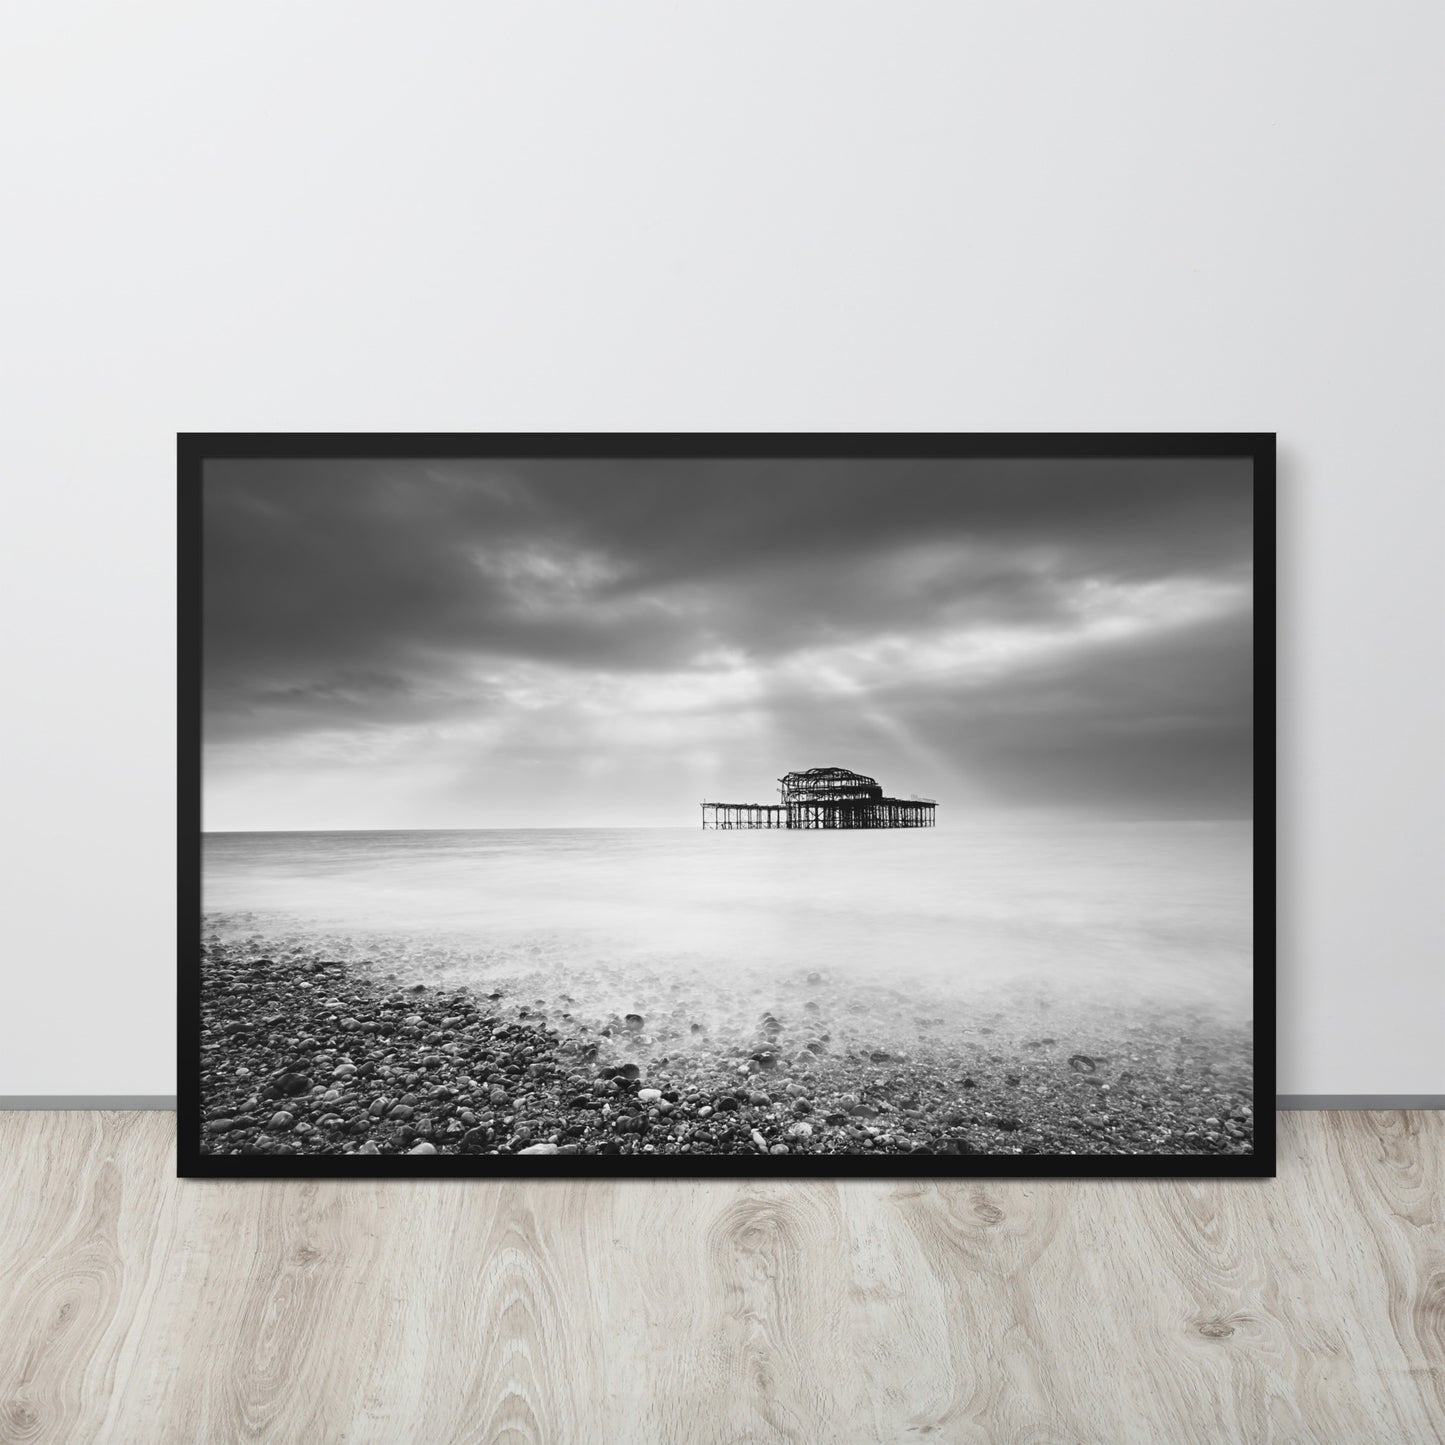 Cool Home Office Art: Abandoned West Pier Coastal Seascape Landscape Black and White Photograph Framed Wall Art Print